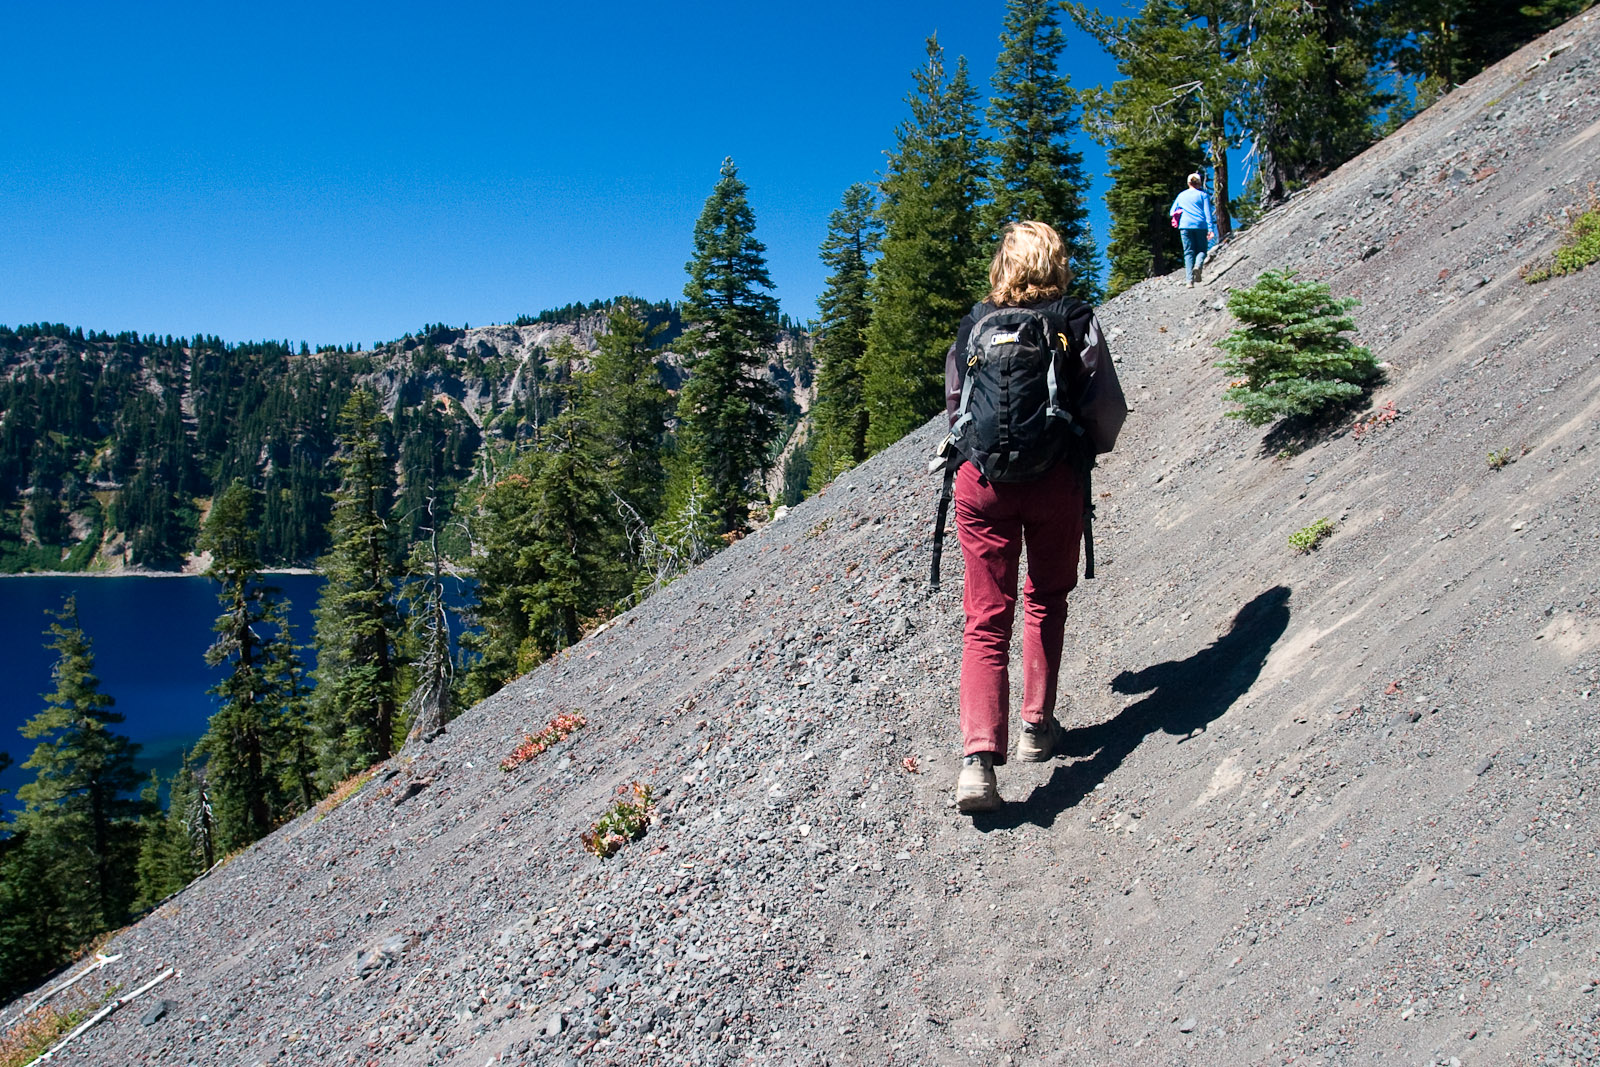 Burn 12% More Calories By Weighted Vest Hike | RDX Sports Blog